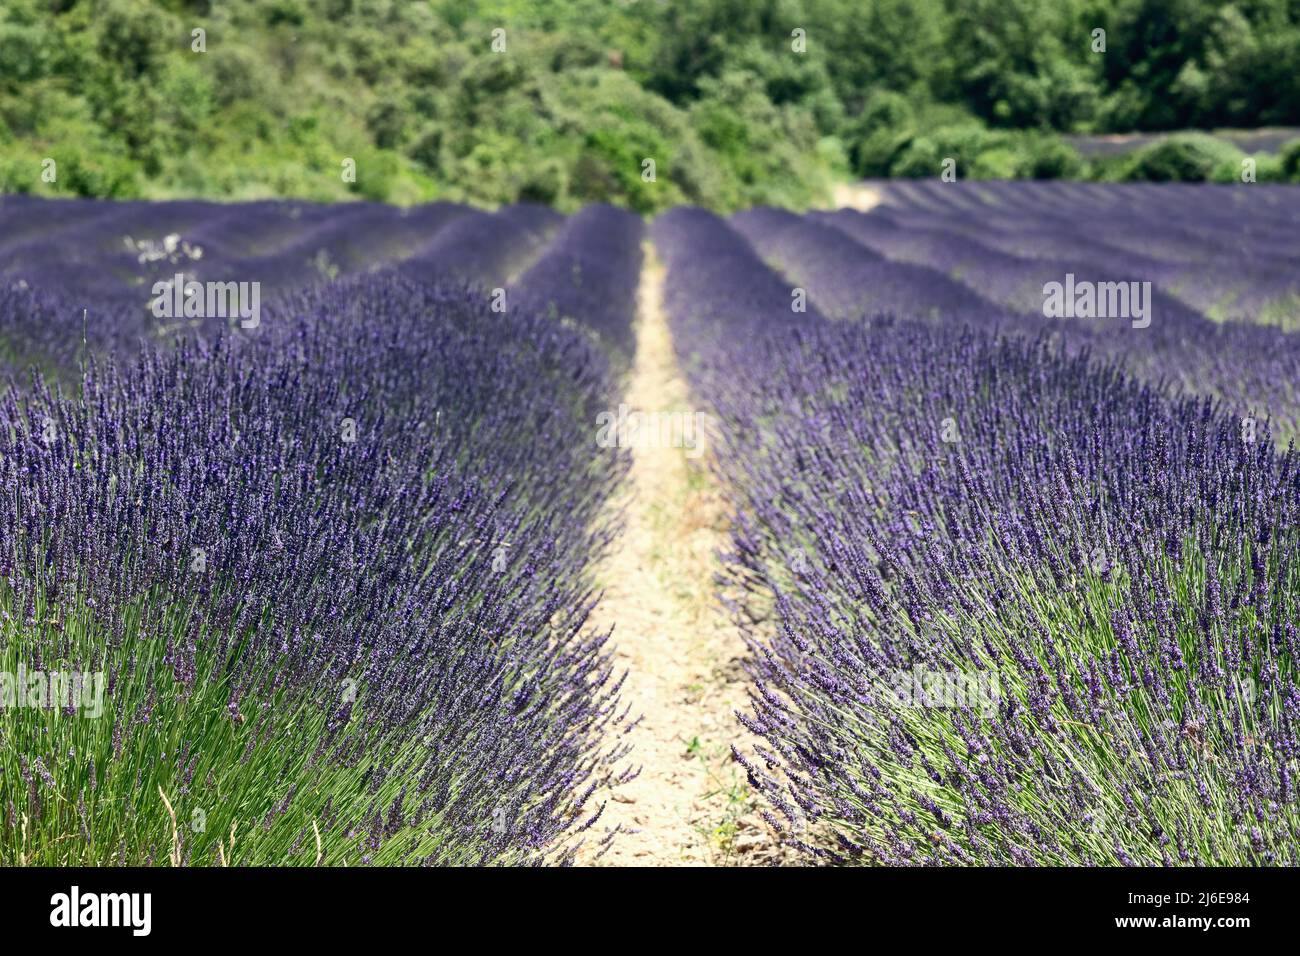 Selective focus on first rows of lavender spikelets in long lines of planting lavender on cultivated field. Vaucluse, Provence, France Stock Photo